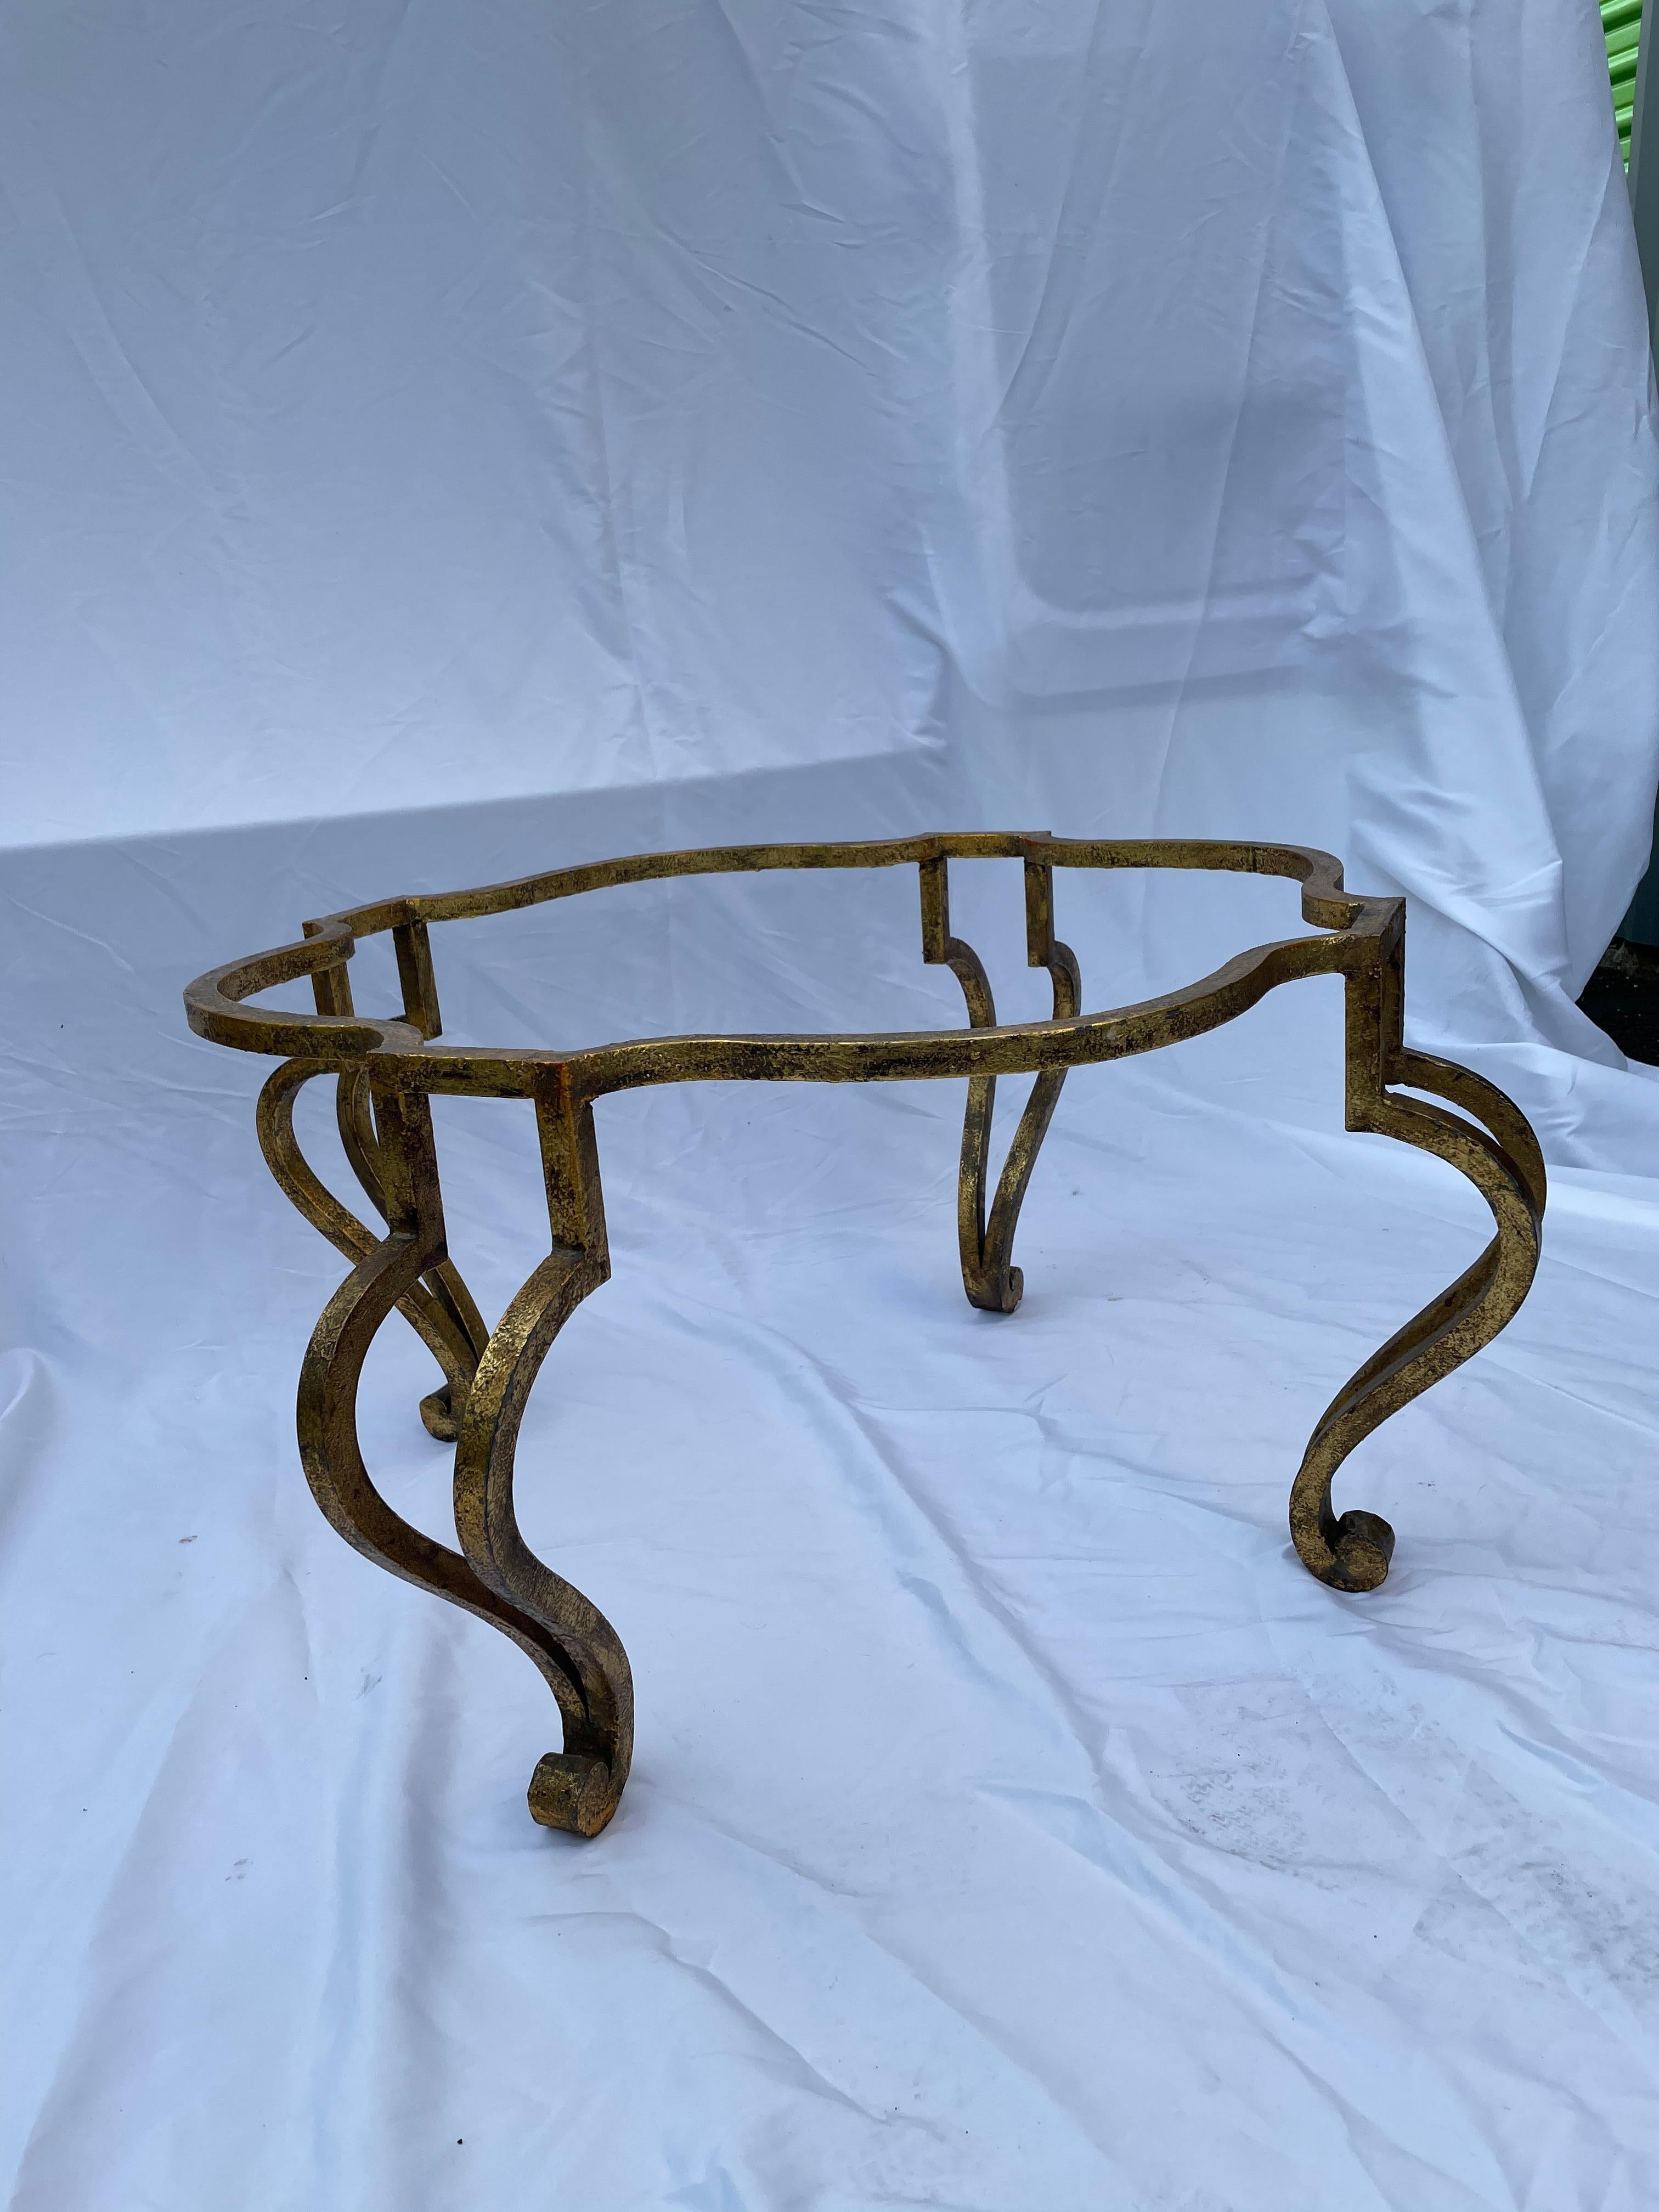 1950's -60's coffee table in gilded bronze and scroll legs with uniquely shaped thick glass top, French.